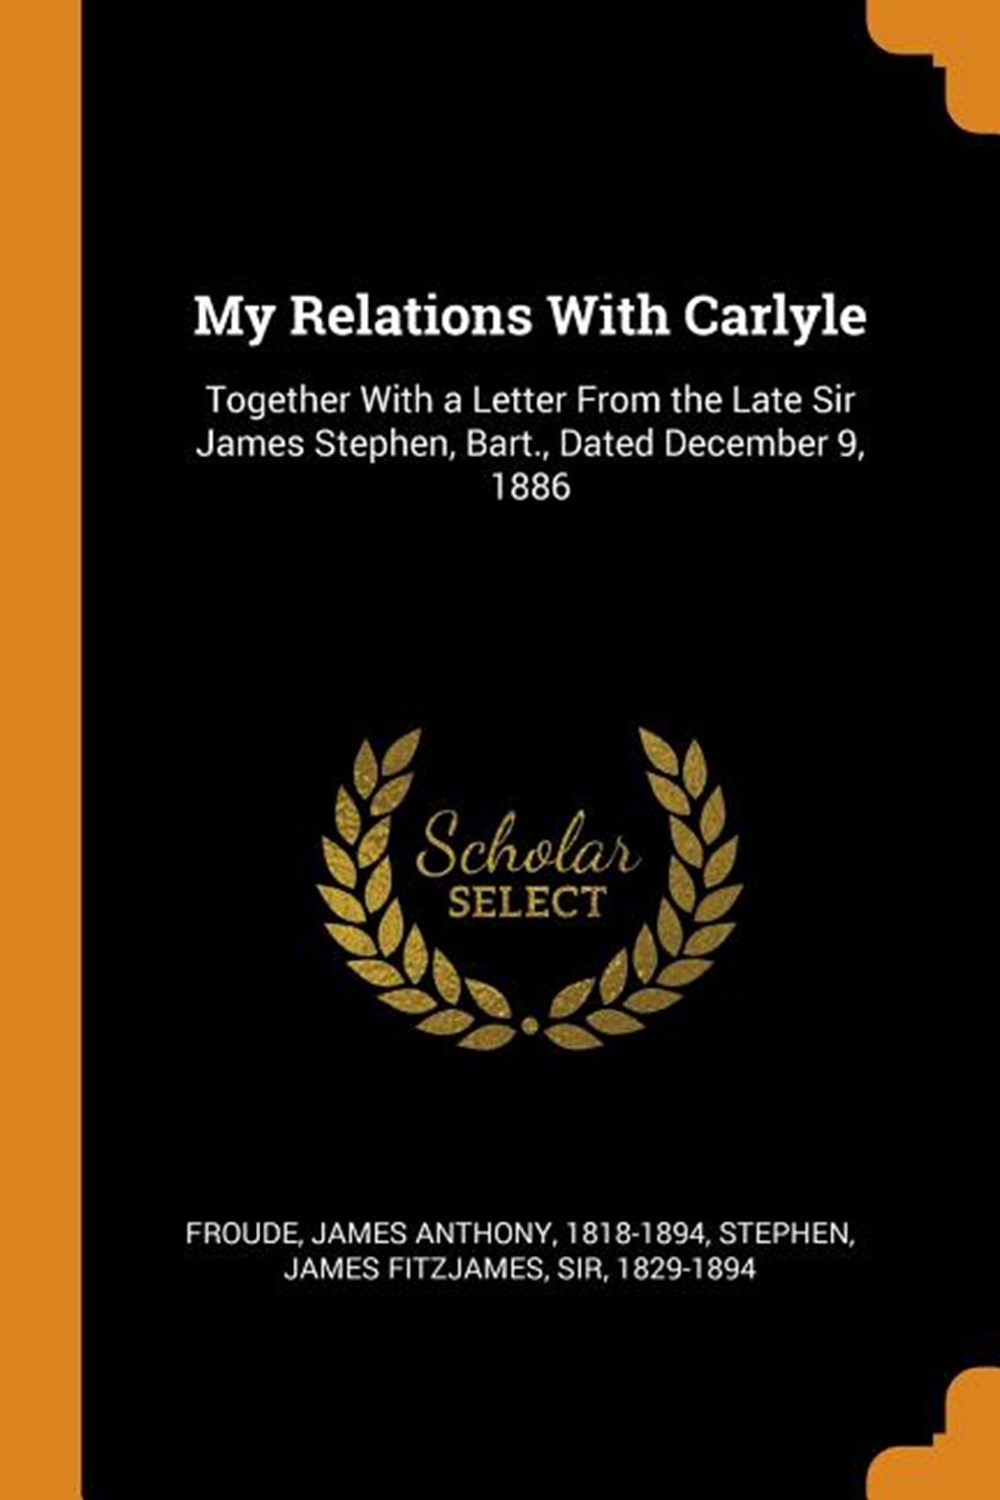 My Relations with Carlyle: Together with a Letter from the Late Sir James Stephen, Bart., Dated Dece